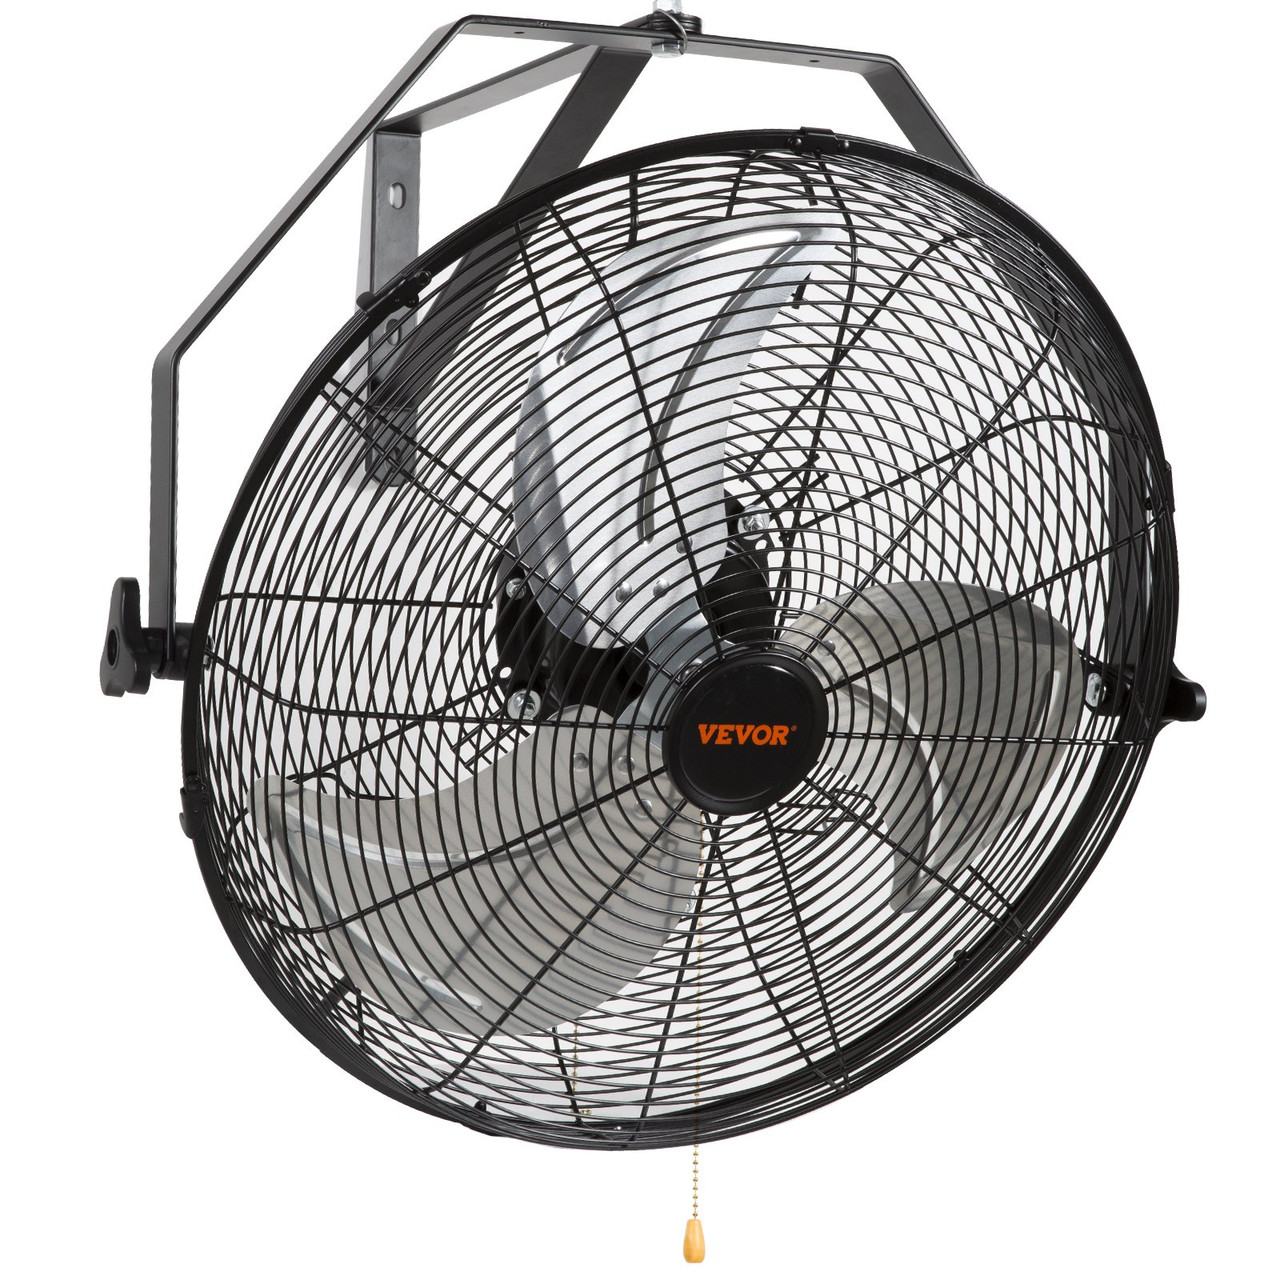 Wall Mount Fan, 18 Inch, 3-speed High Velocity Max. 4150 CFM, Waterproof Oscillating Industrial Wall Fan, Commercial or Residential for Warehouse, Greenhouse, Workshop, Patio, Black, ETL Listed